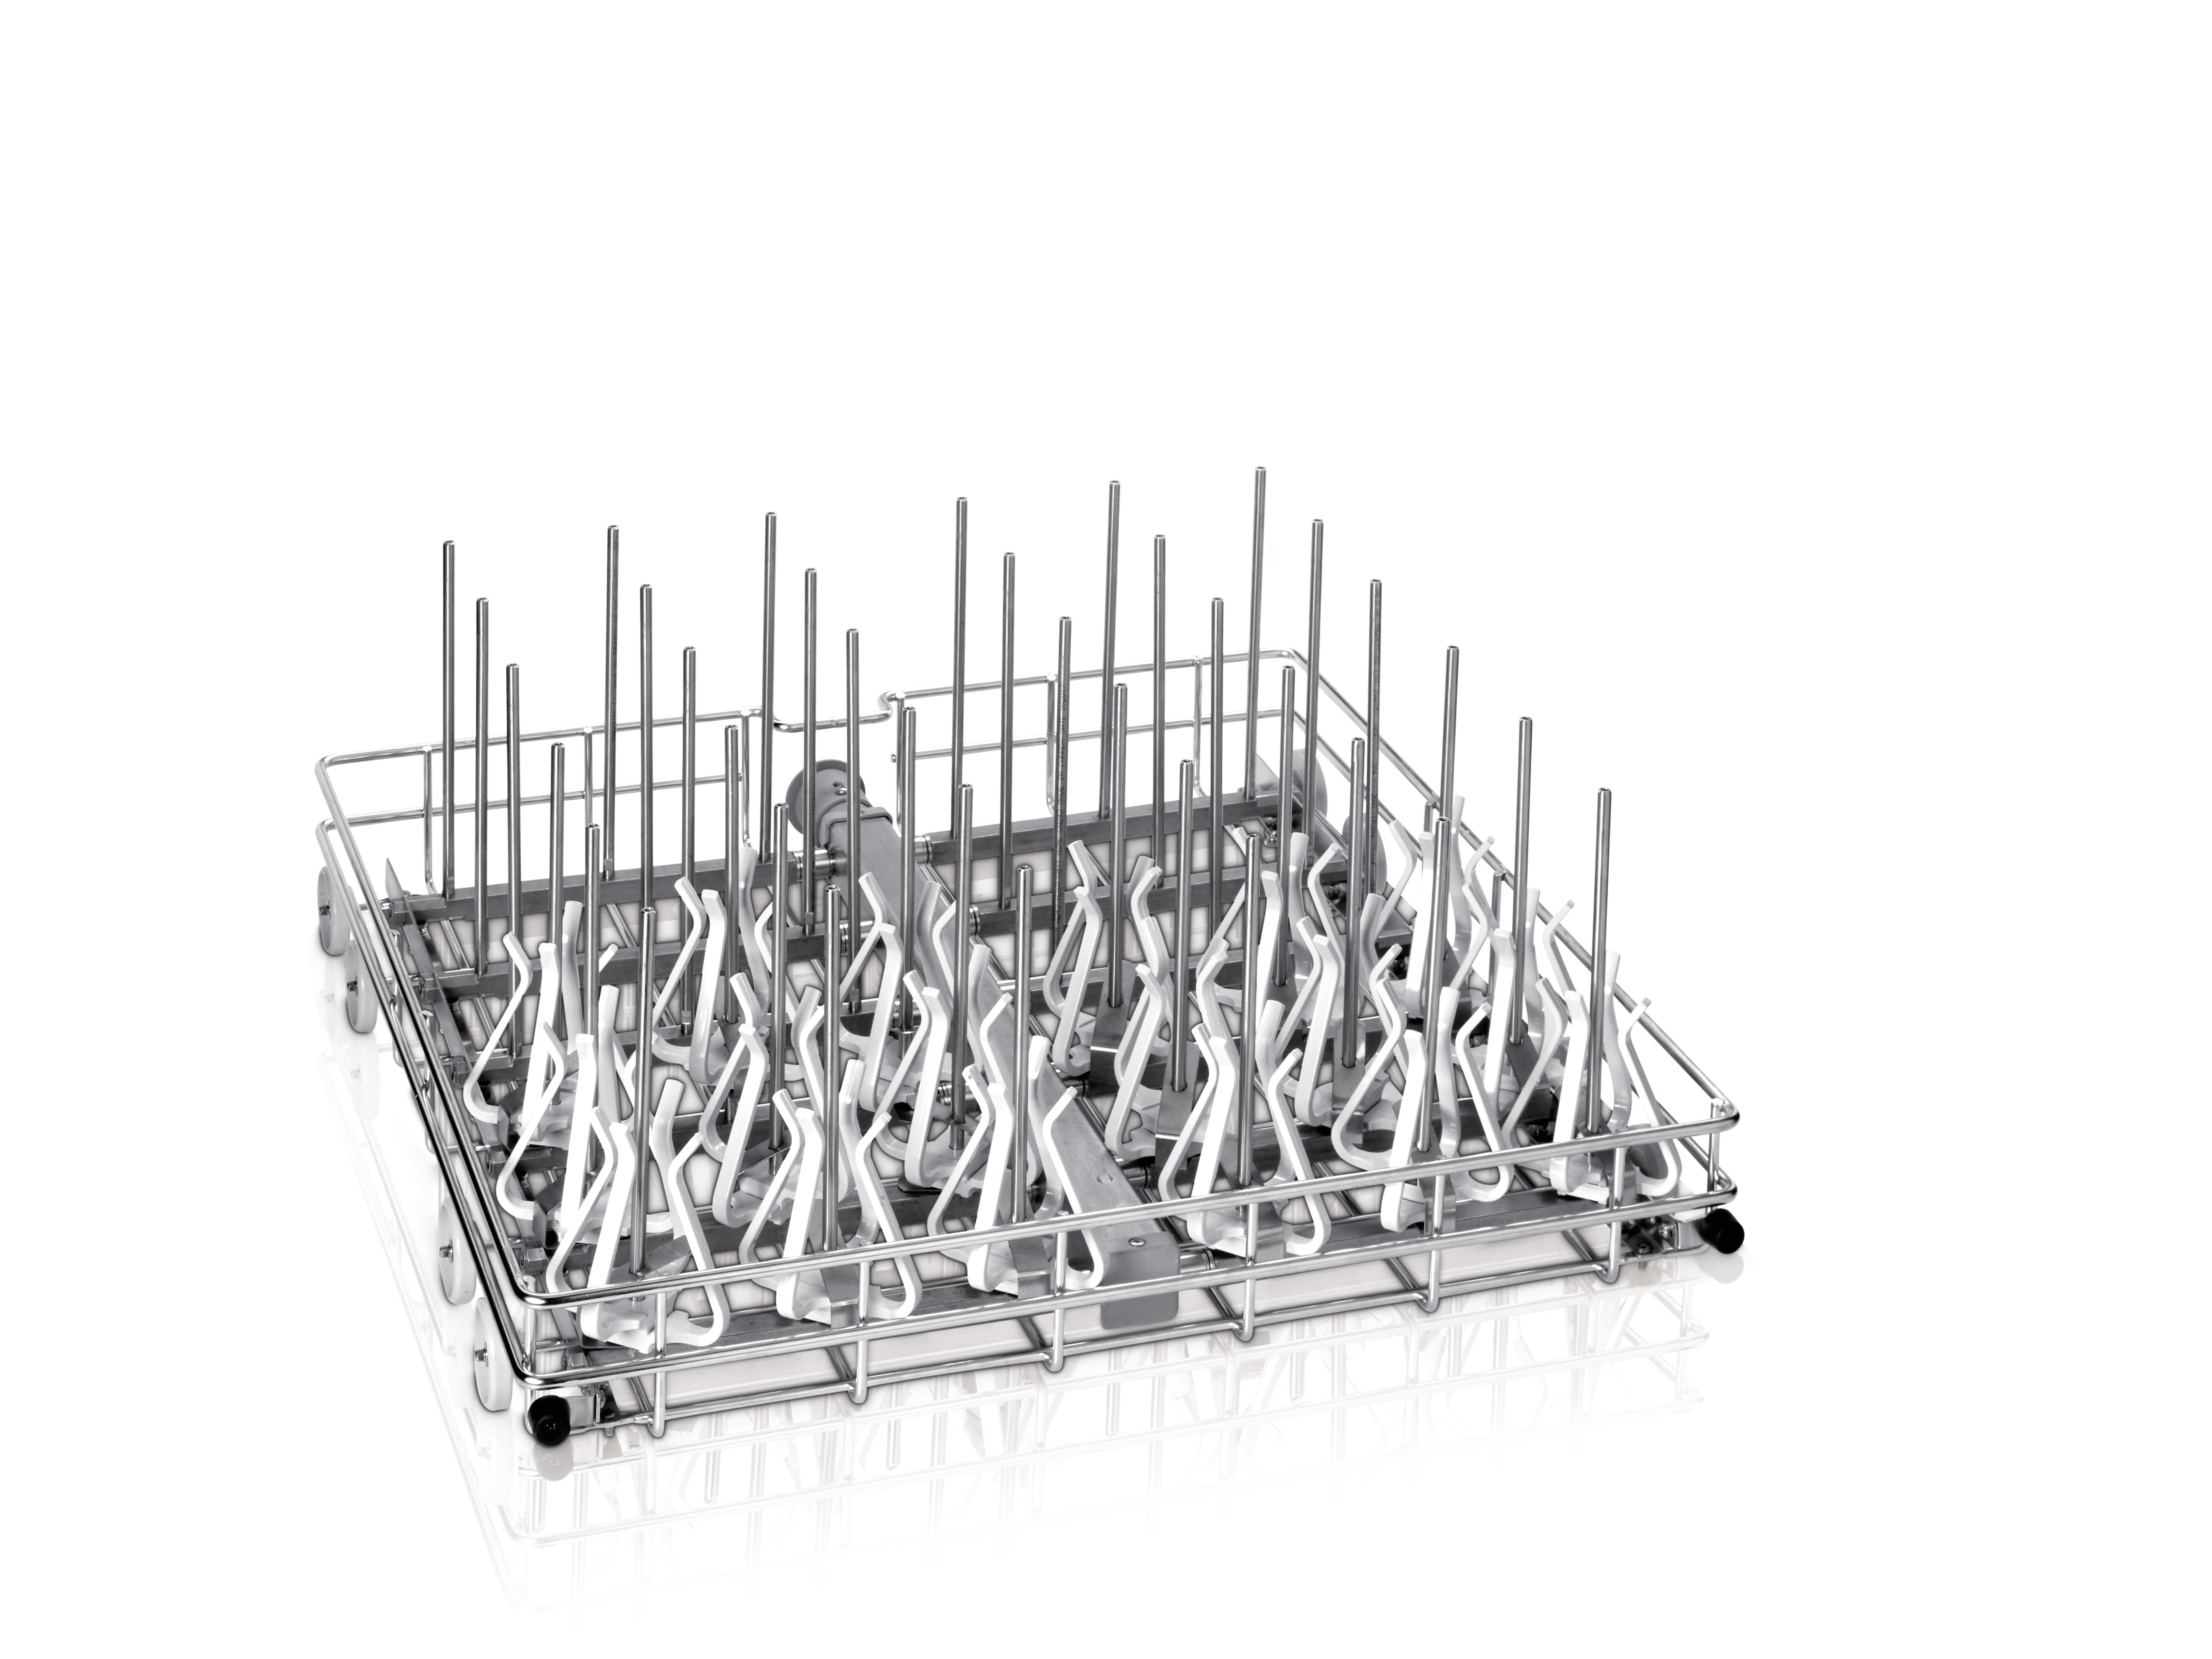 Labconco Lower Spindle Rack